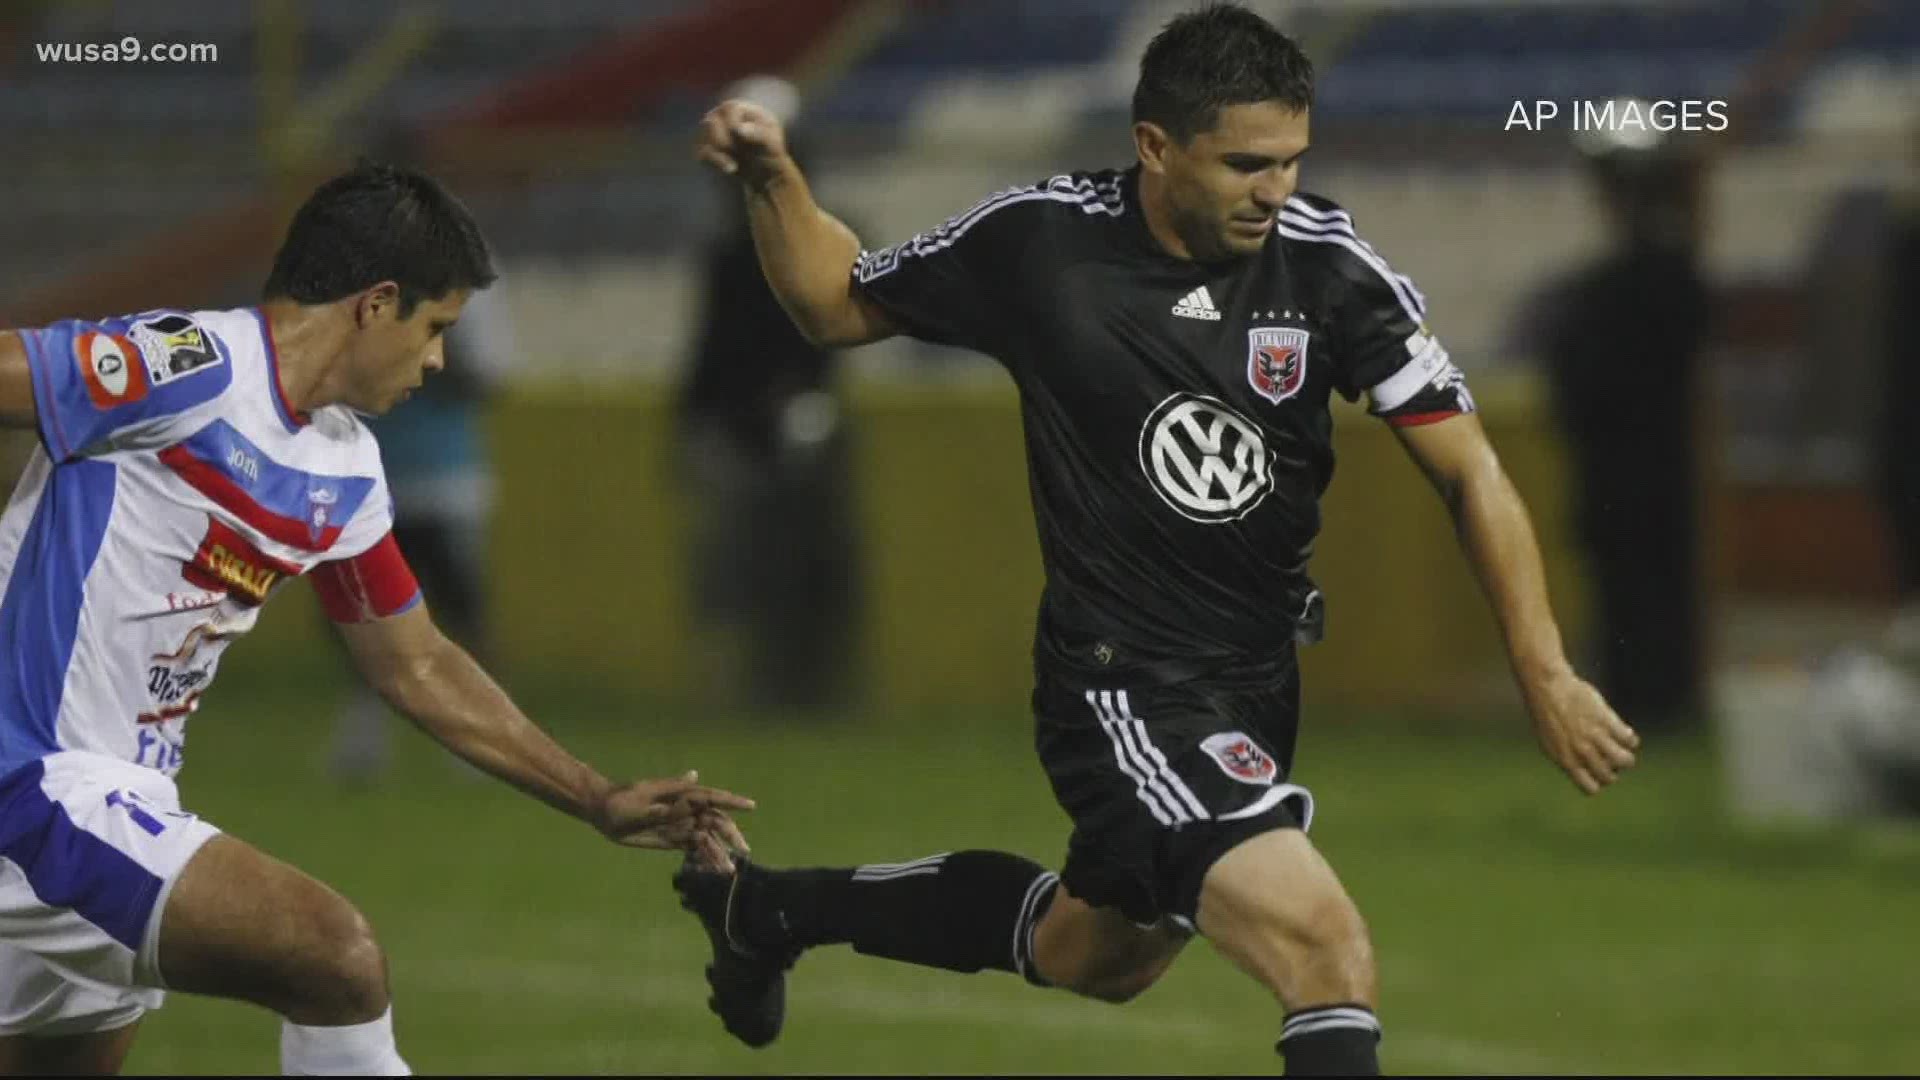 DC United legend Jaime Moreno was hit in the eye by his own golf ball. A friend said Moreno could have permanent eye damage or need surgery to remove the eye.